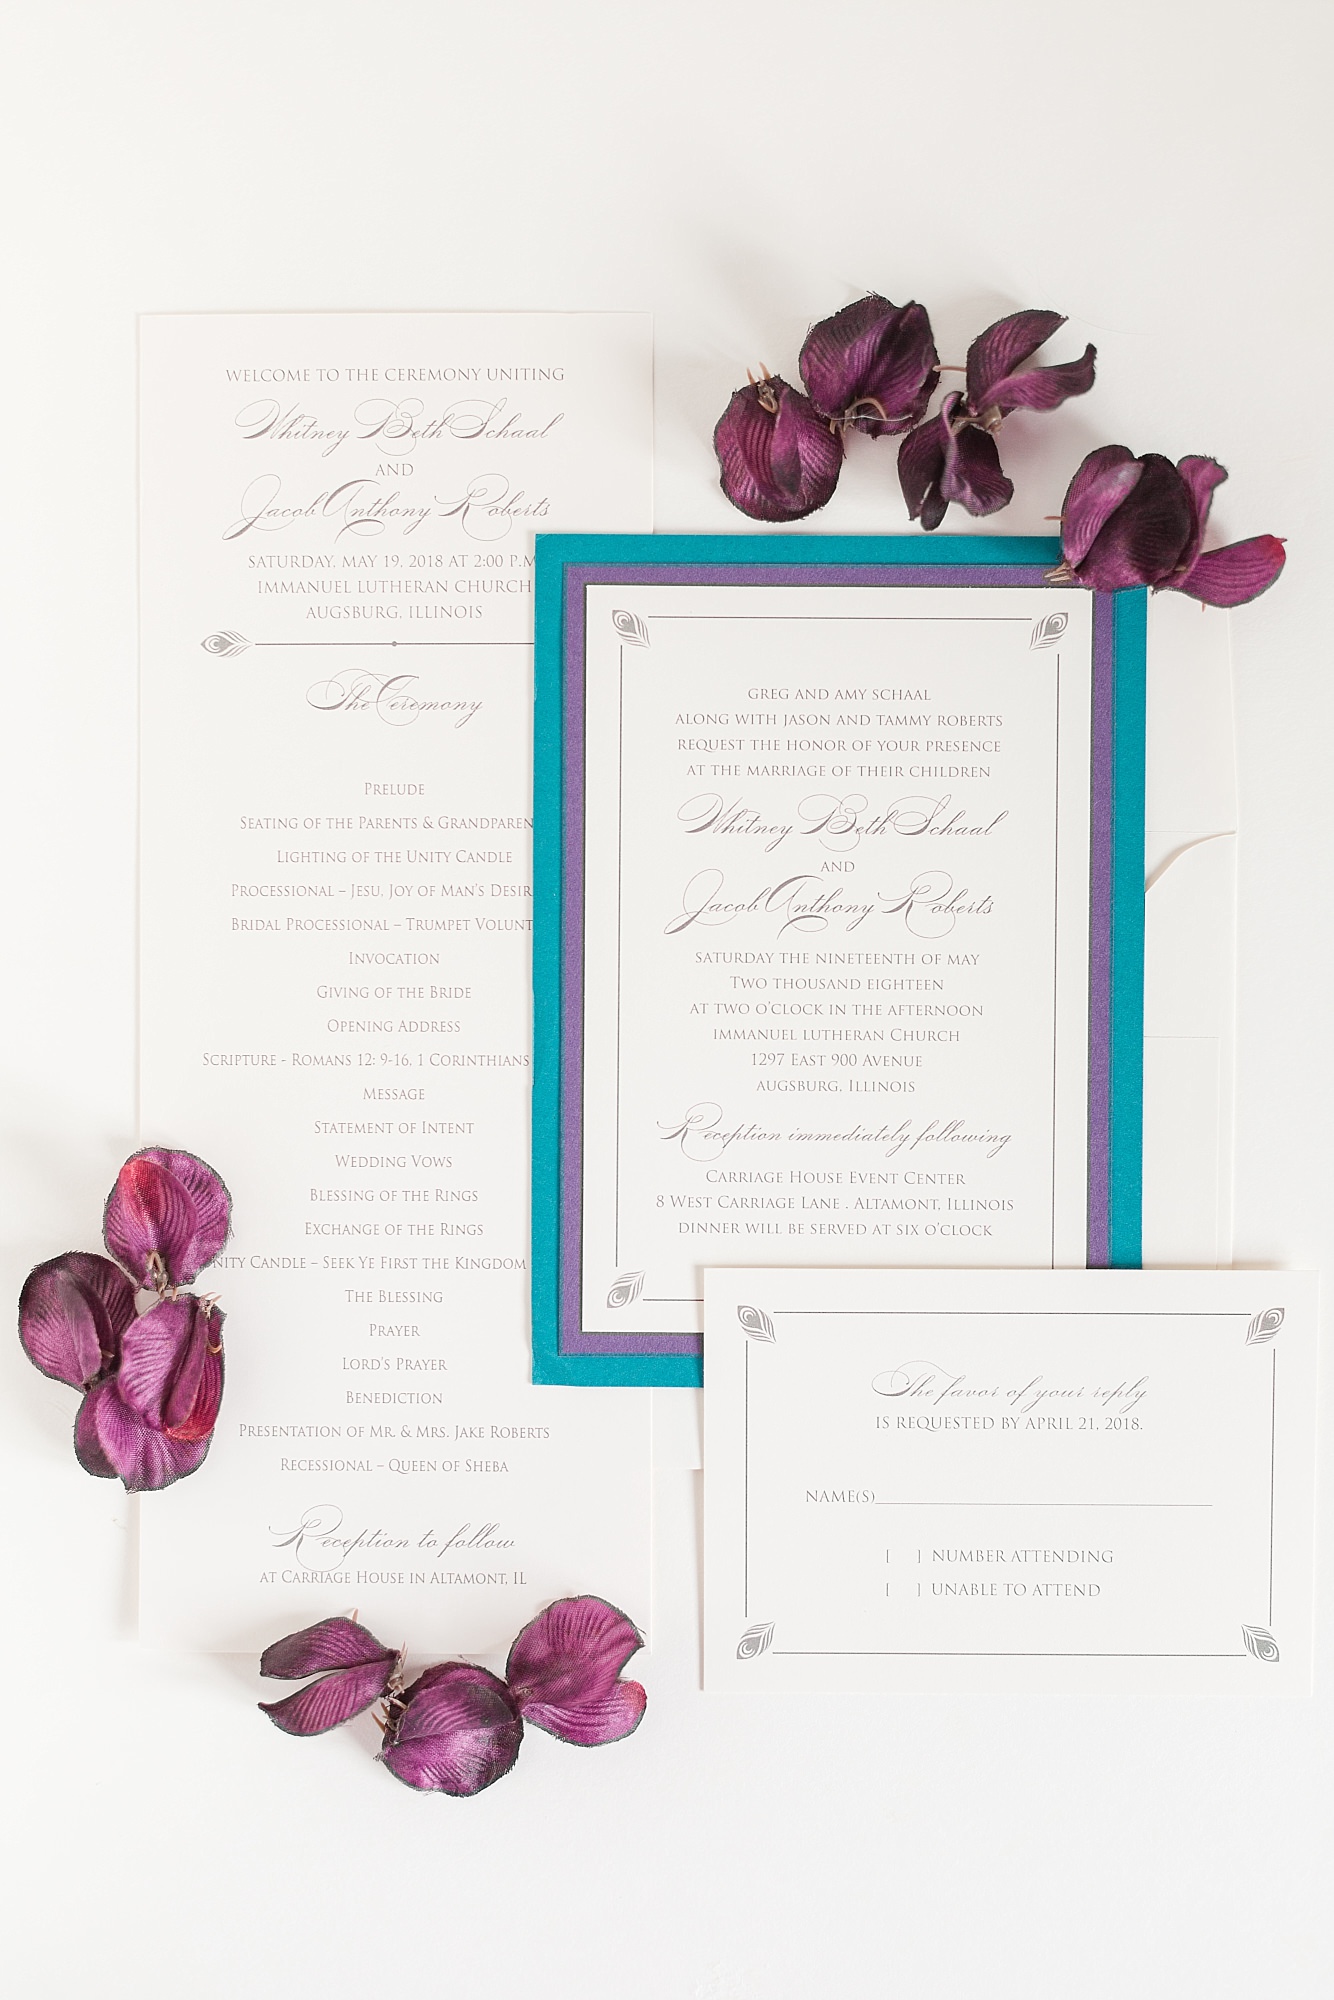 White wedding invites with purple and blue edging and peacock feather details